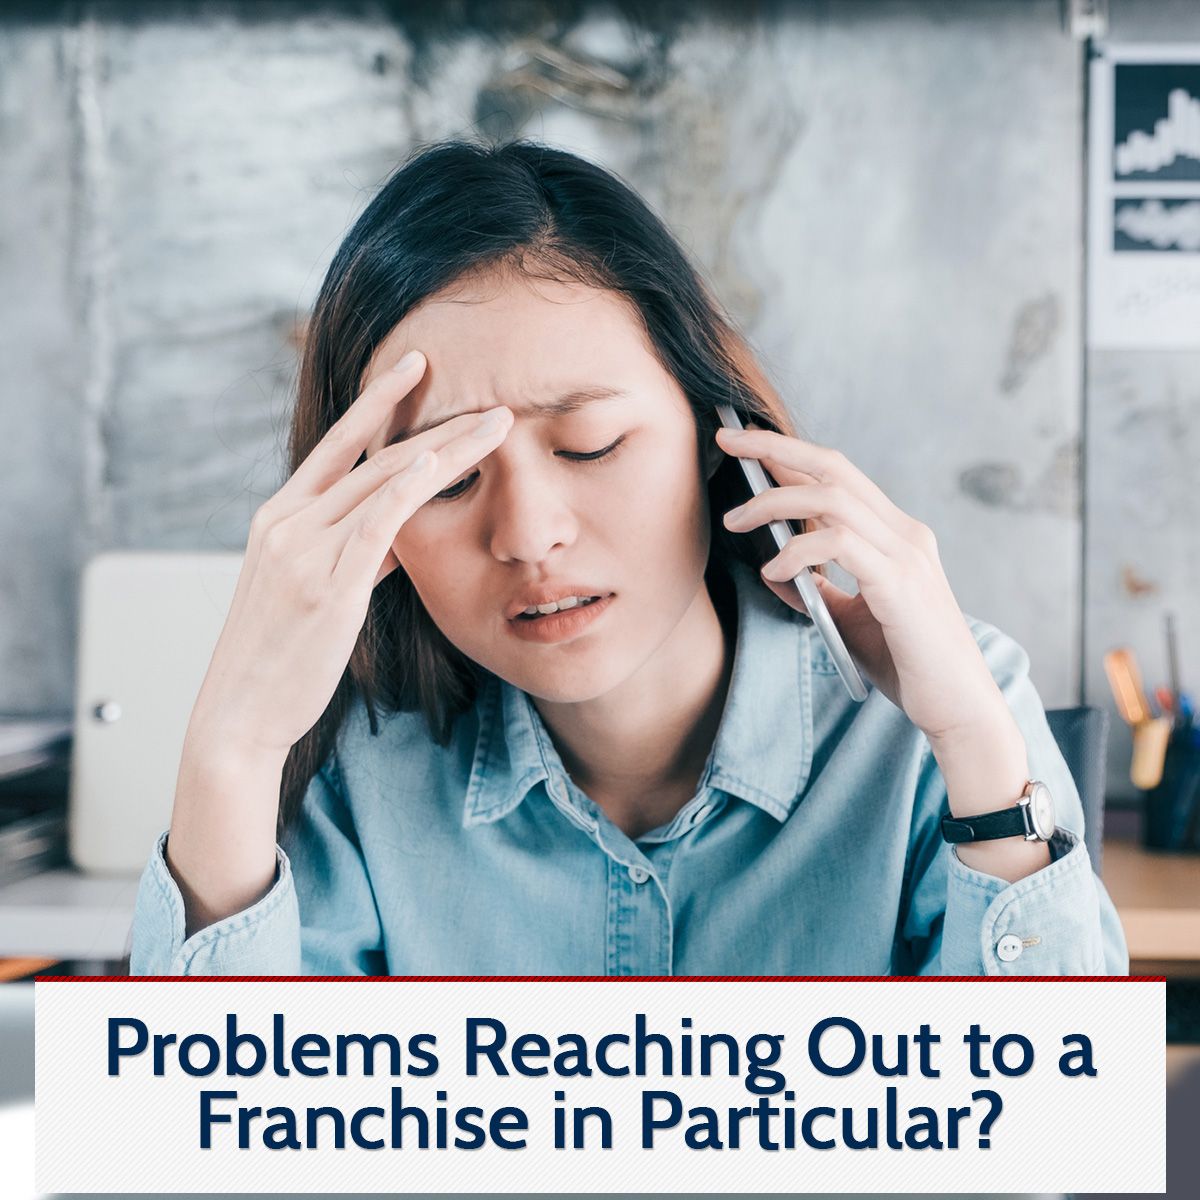 Problems Reaching Out to a Franchise in Particular?